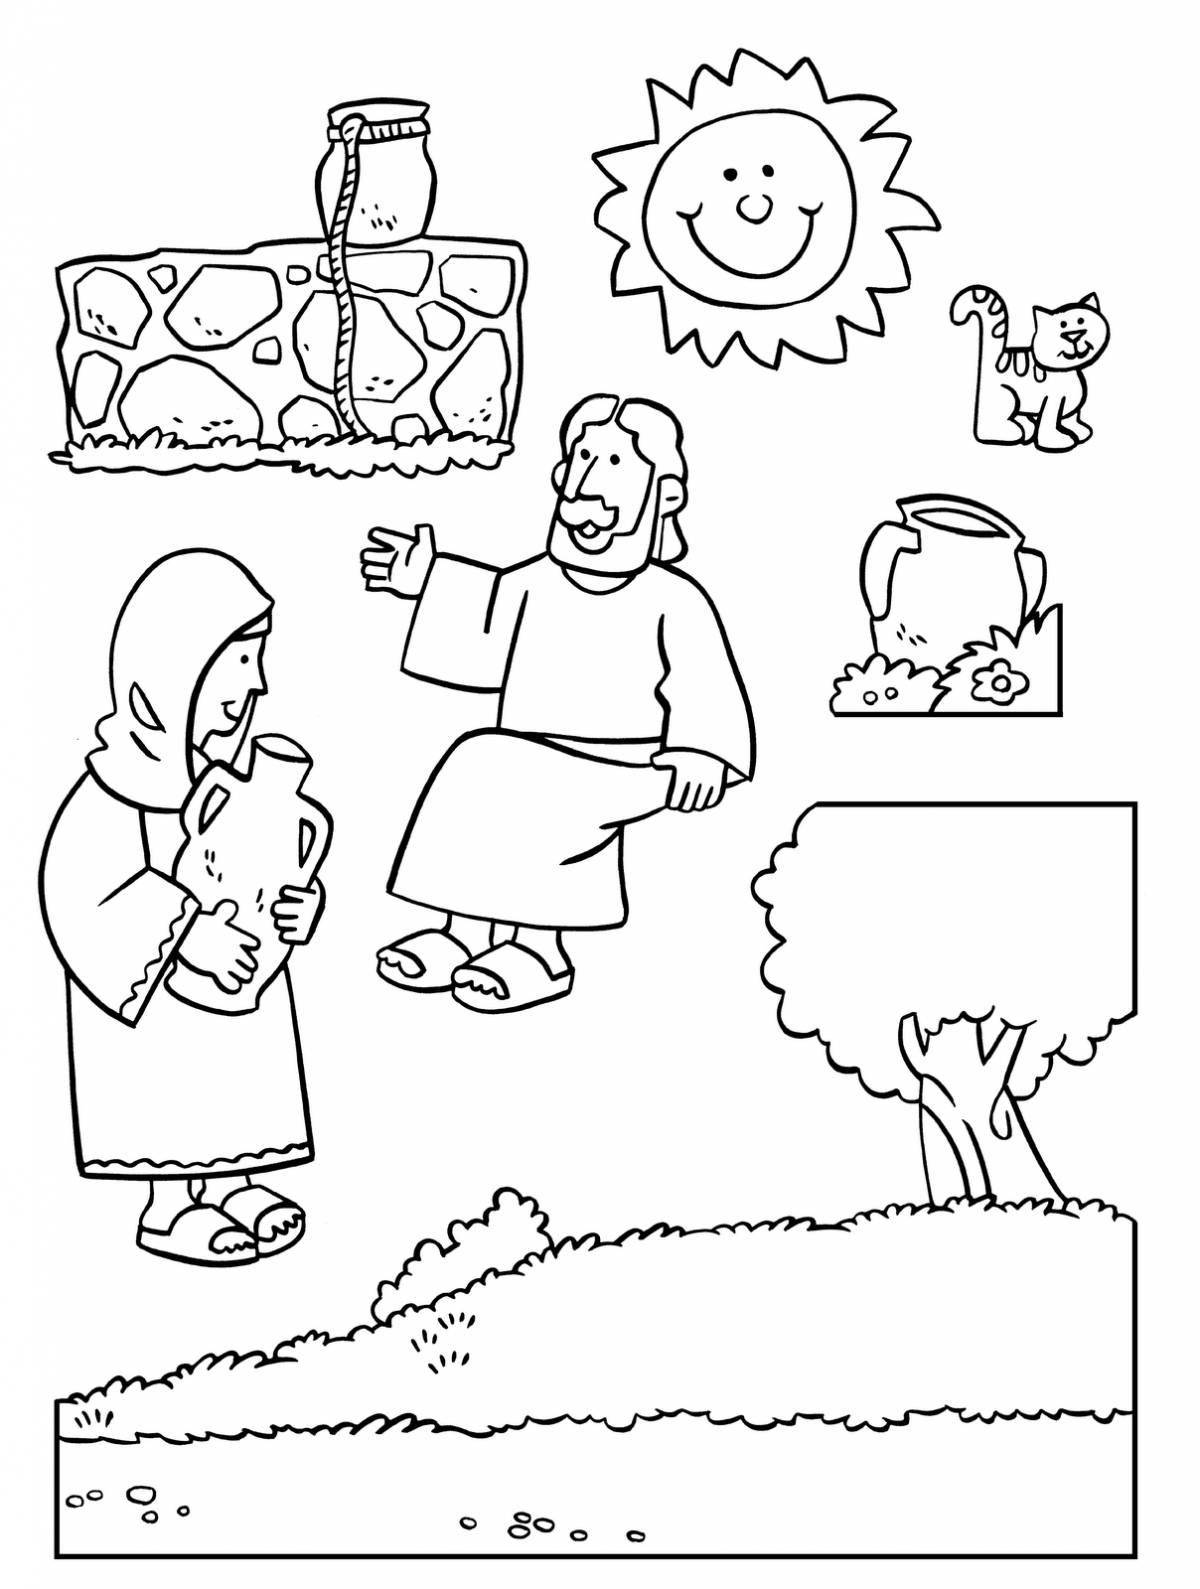 Sunday School Explosion Coloring Page